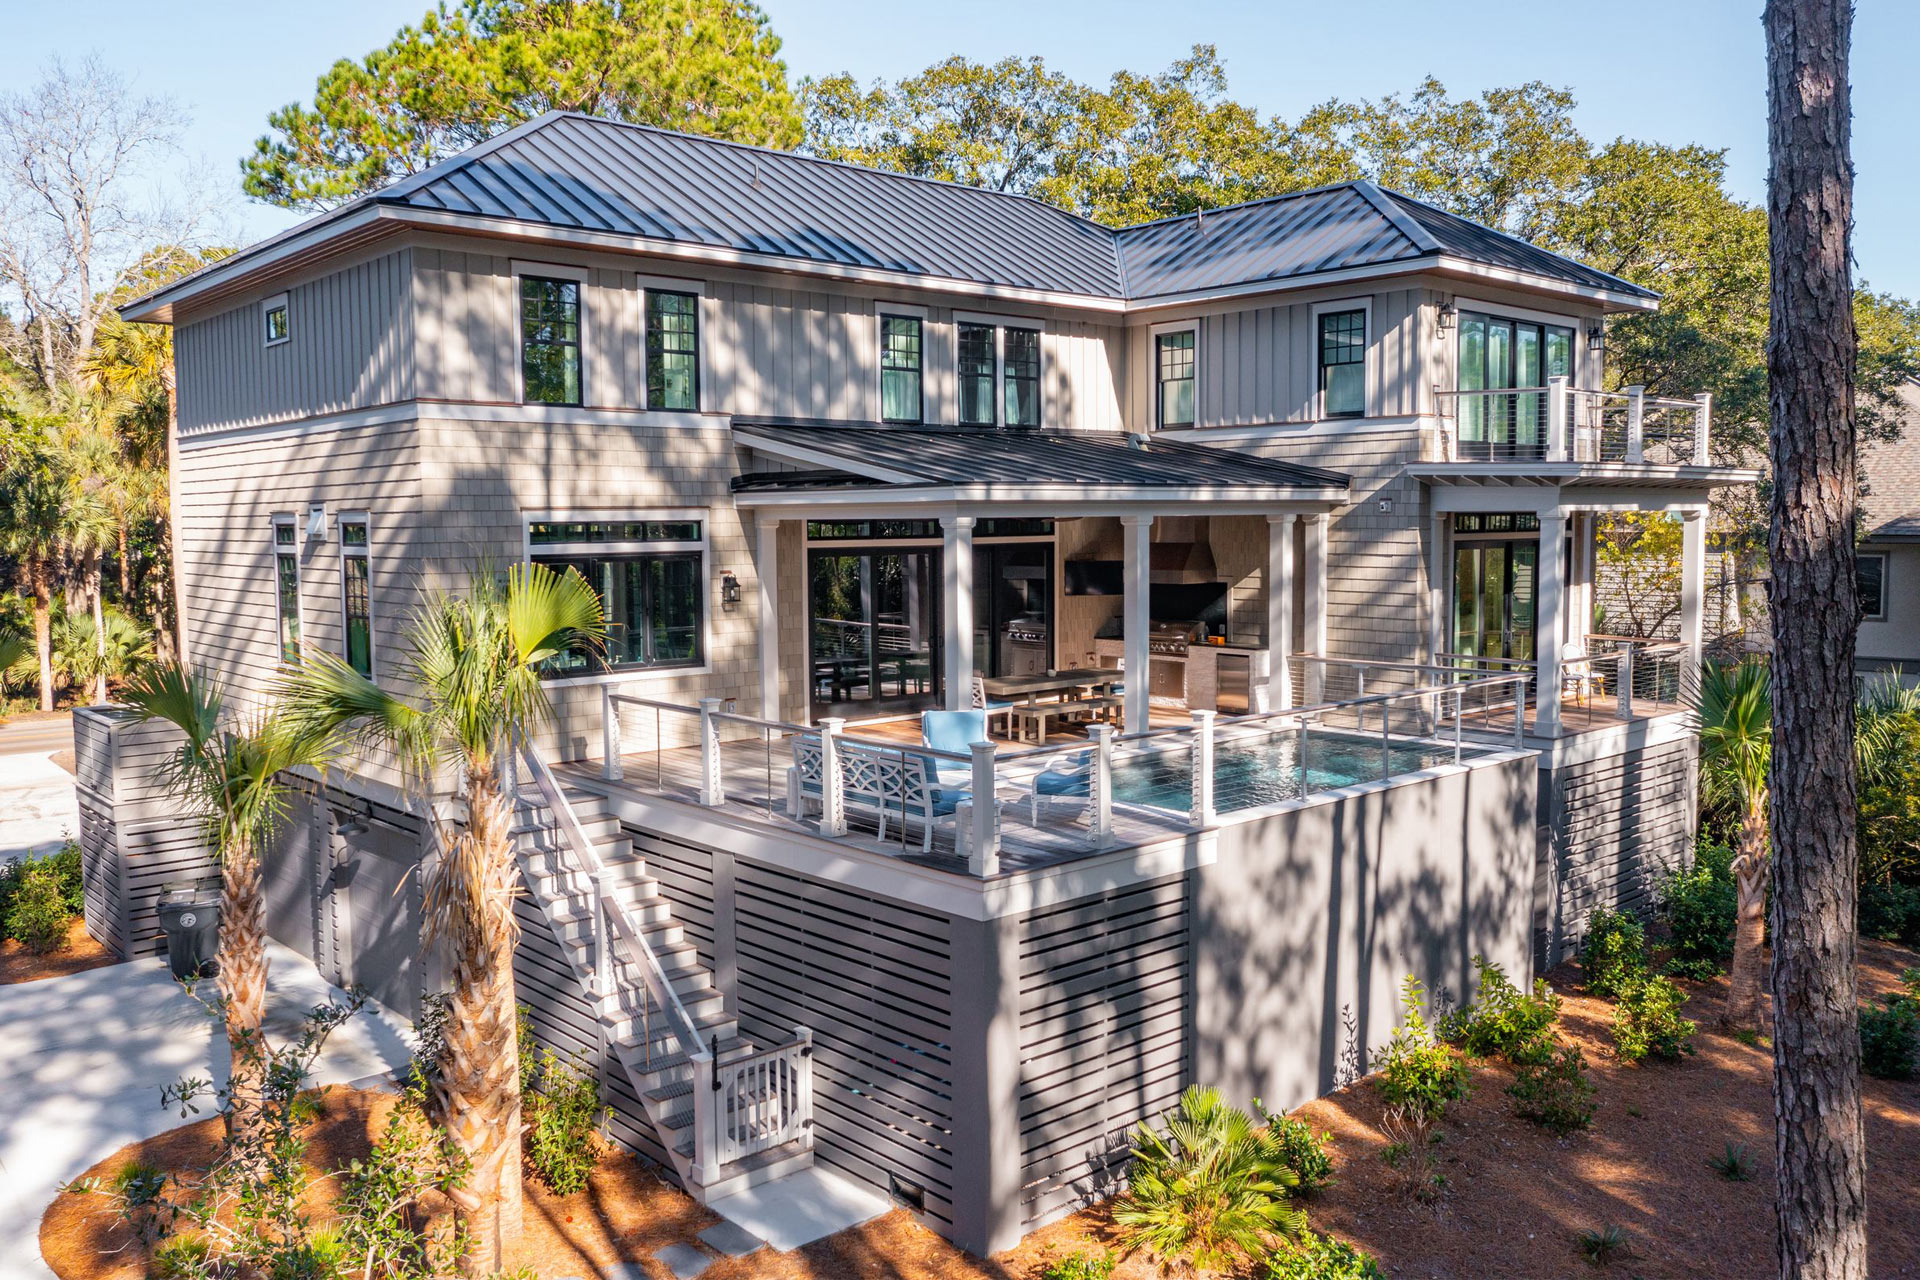 Rear view of newly designed home on Kiawah Island by Swallowtail Architecture